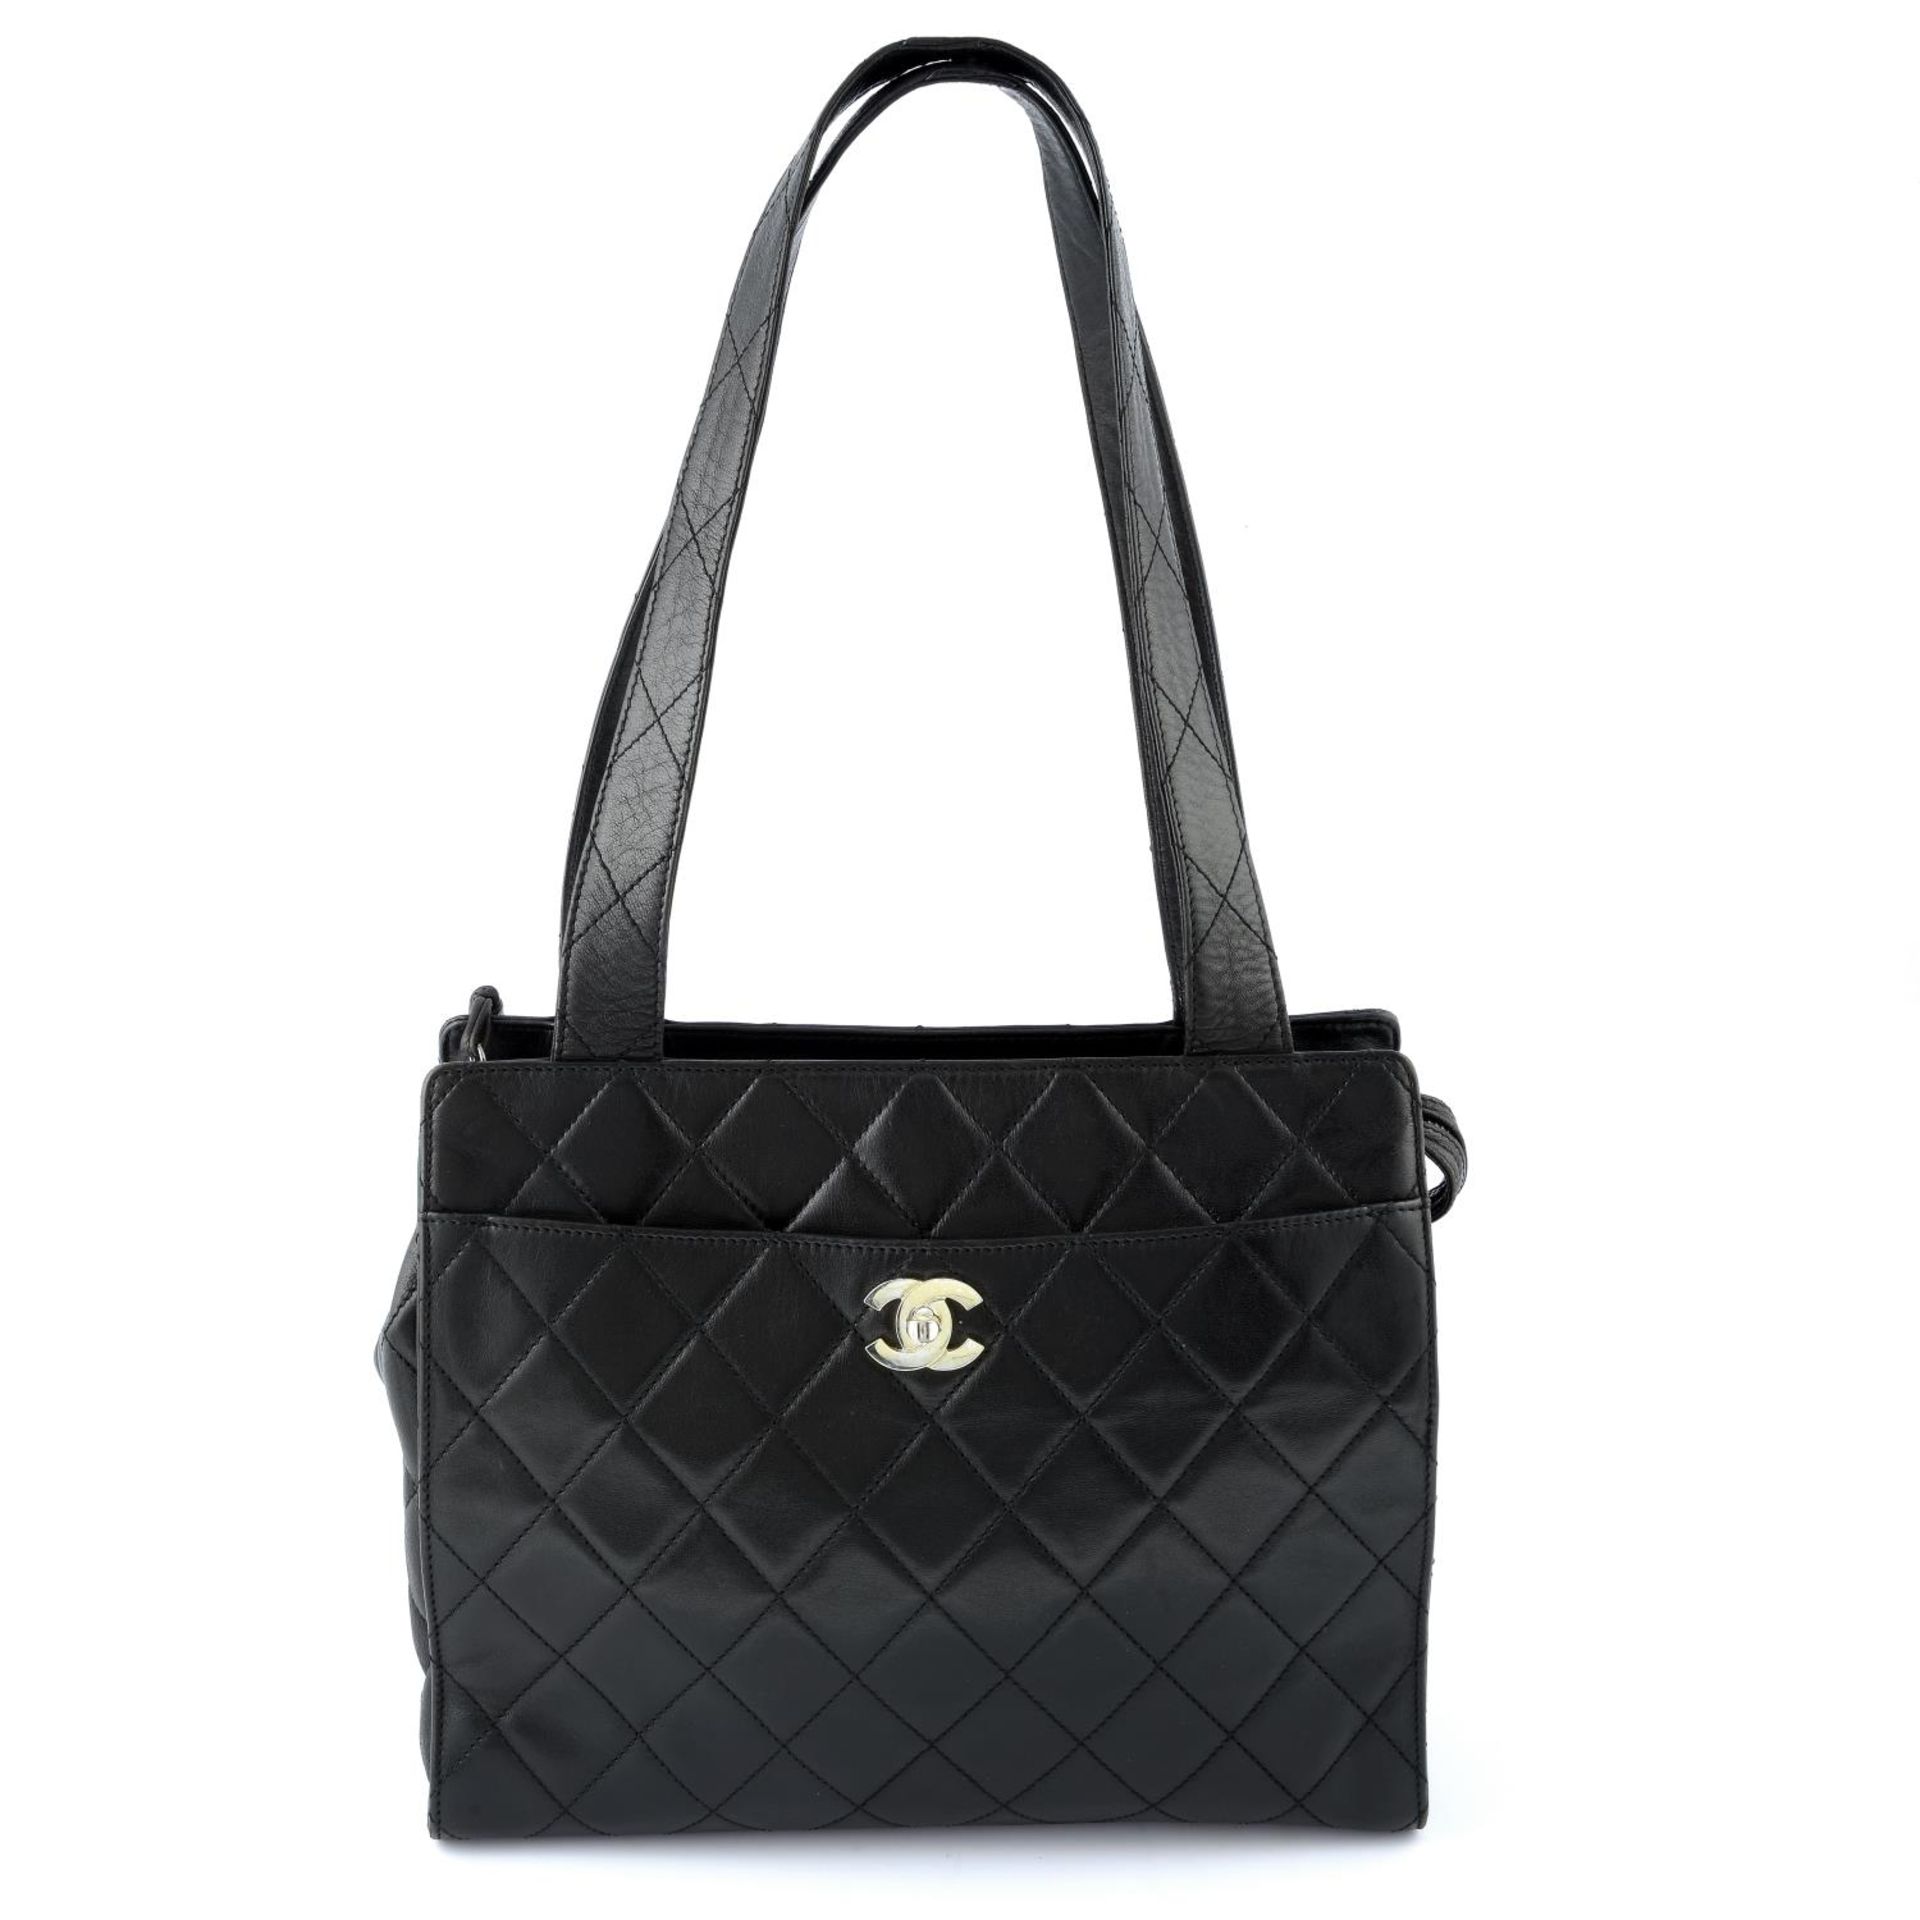 CHANEL - a black quilted leather zip handbag.